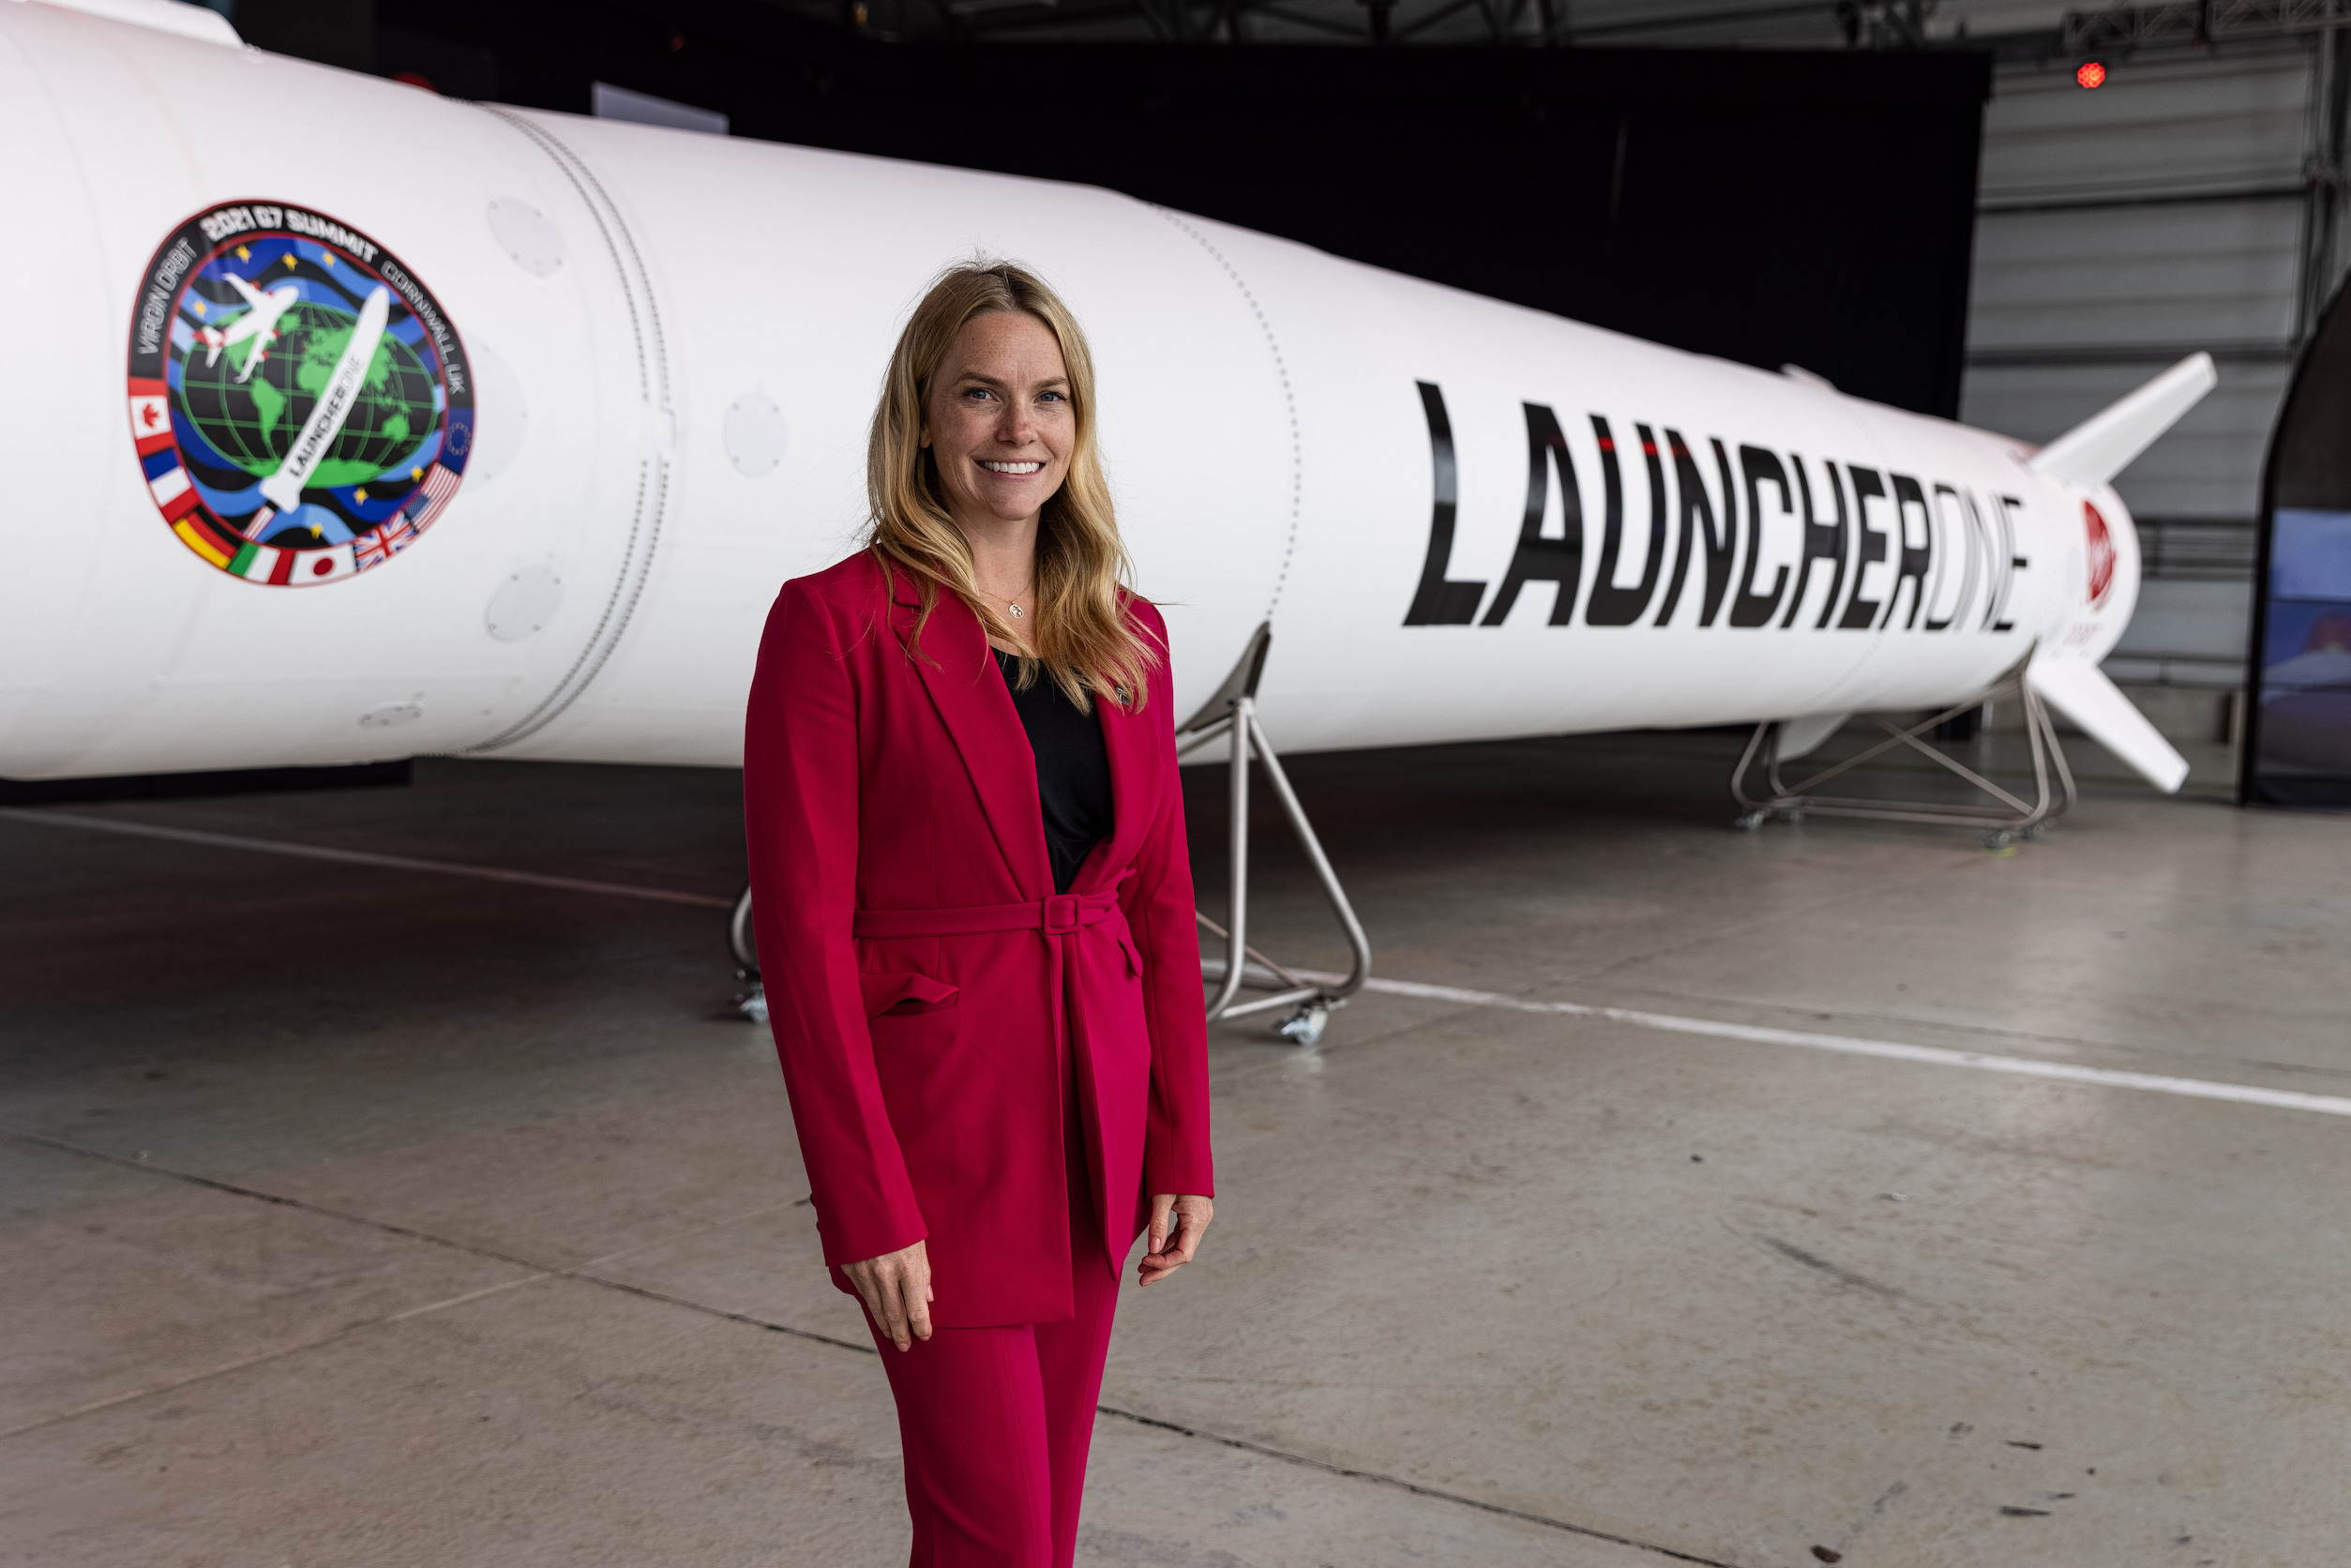 Melissa Quinn Explains Her Spaceport Cornwall Departure, Next Steps for Spaceport